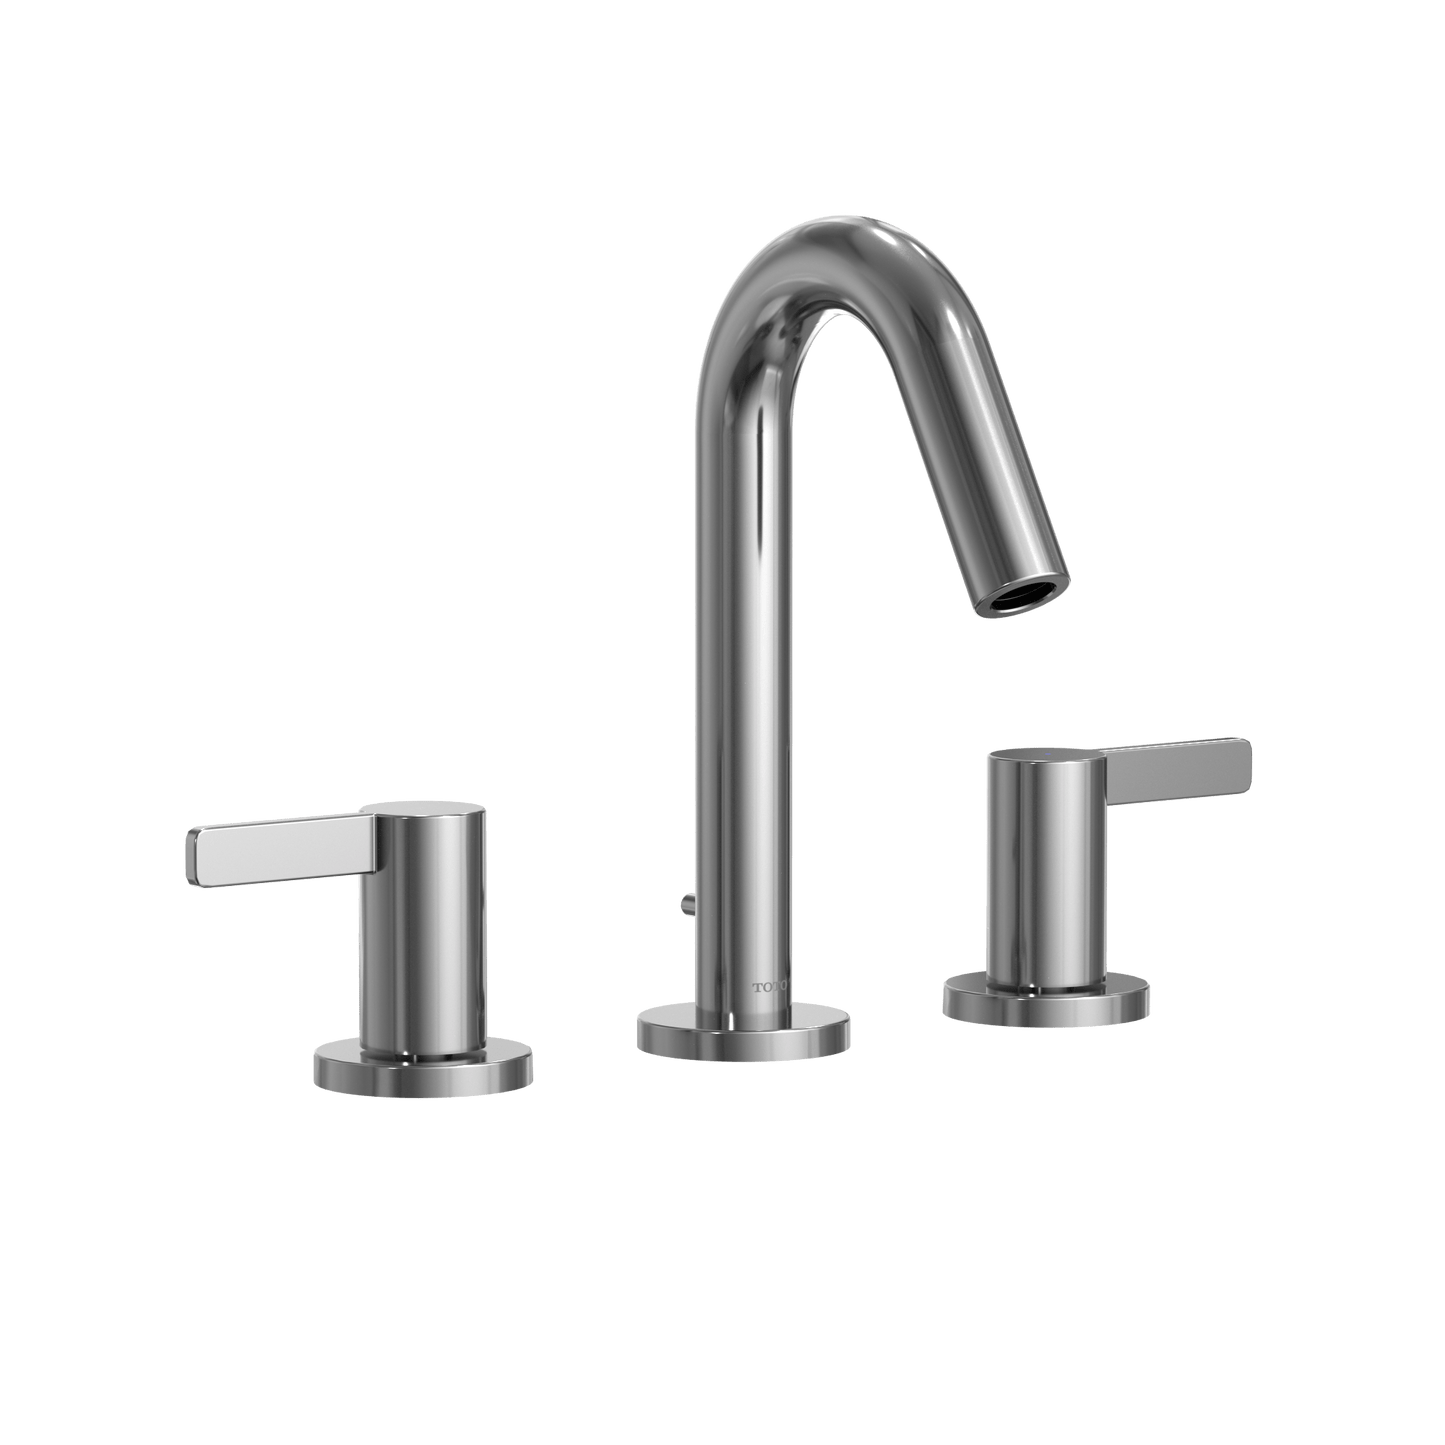 TOTO® GF Series 1.2 GPM Two Lever Handle Widespread Bathroom Sink Faucet  - TLG11201UA